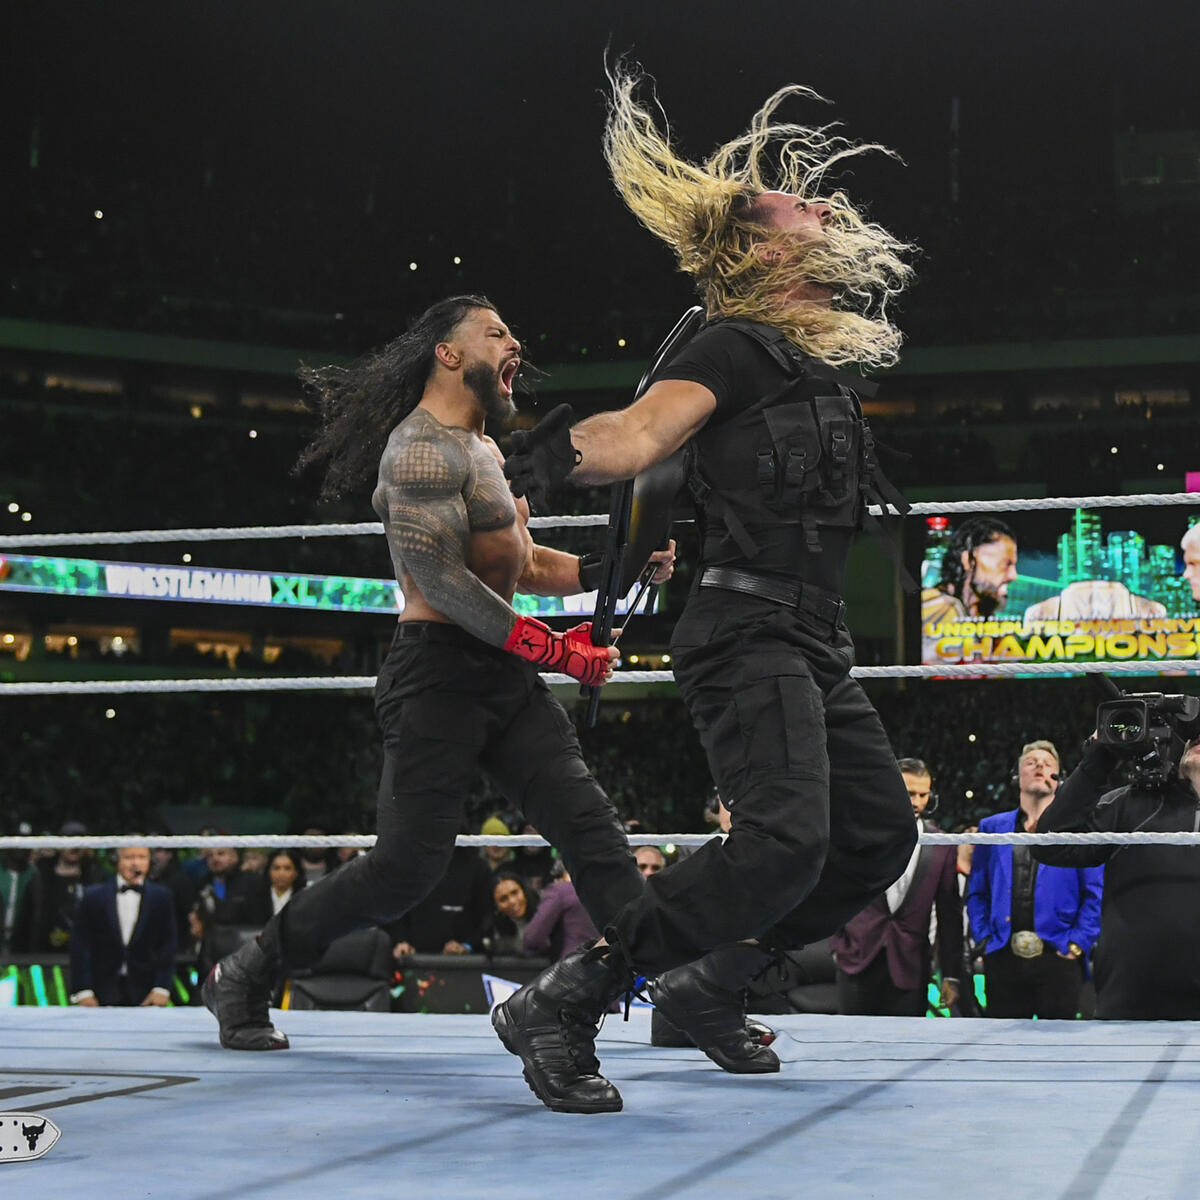 Reigns v Rollins | WM41 | 11 years of trauma, 10 years after Seth took Roman's WM31 moment. To end the cycle of hatred & revenge between the two once & for all. w/ long awaited closure as they embrace each other after the match. 🤌